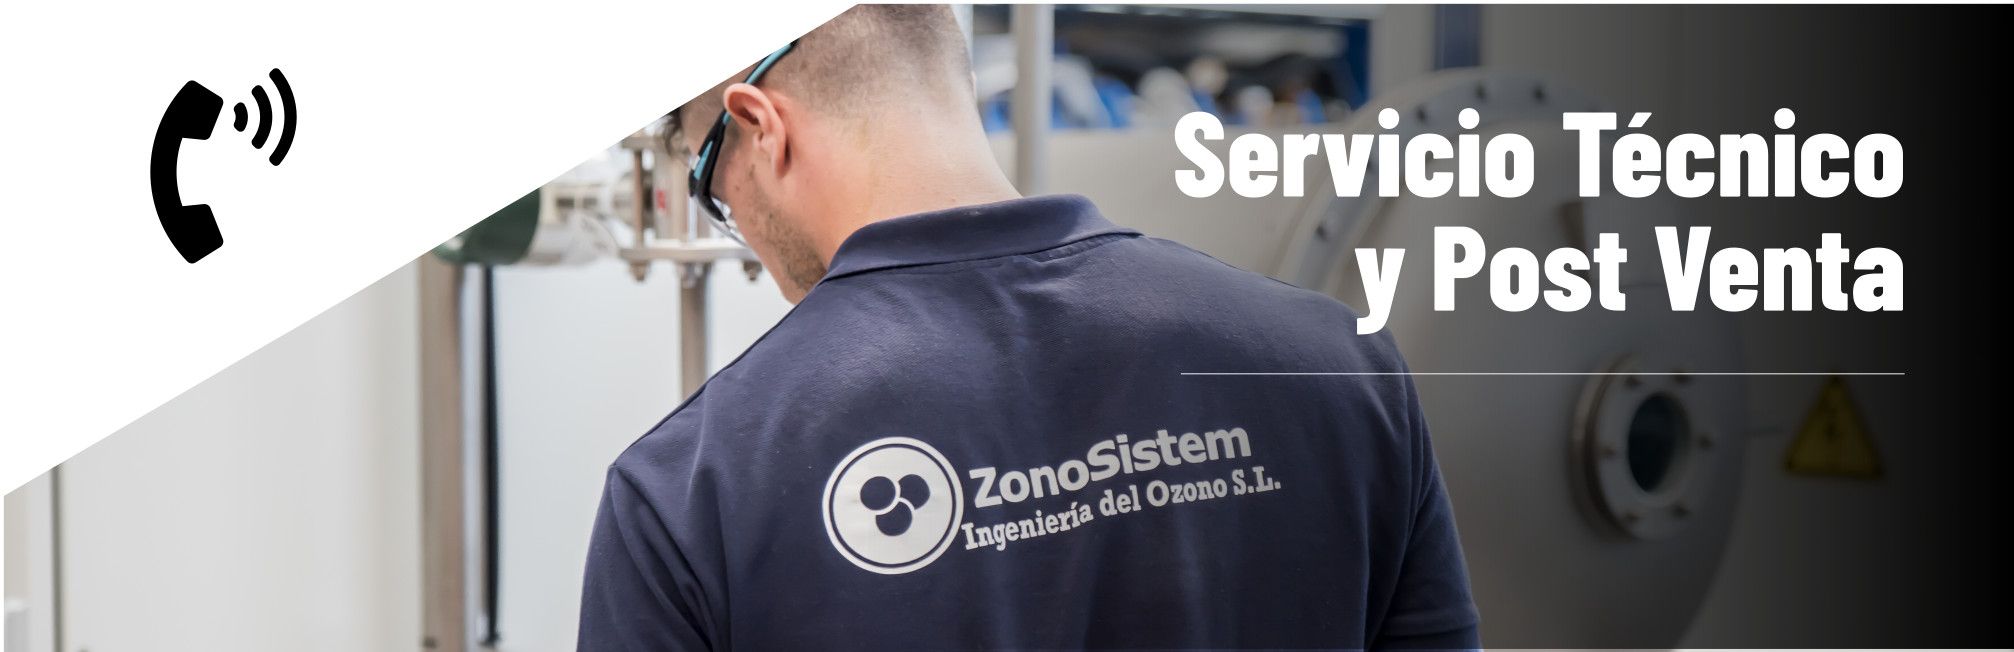 ZonoSistem participated with great success in "ExpoFare" the most advanced irrigation technologies